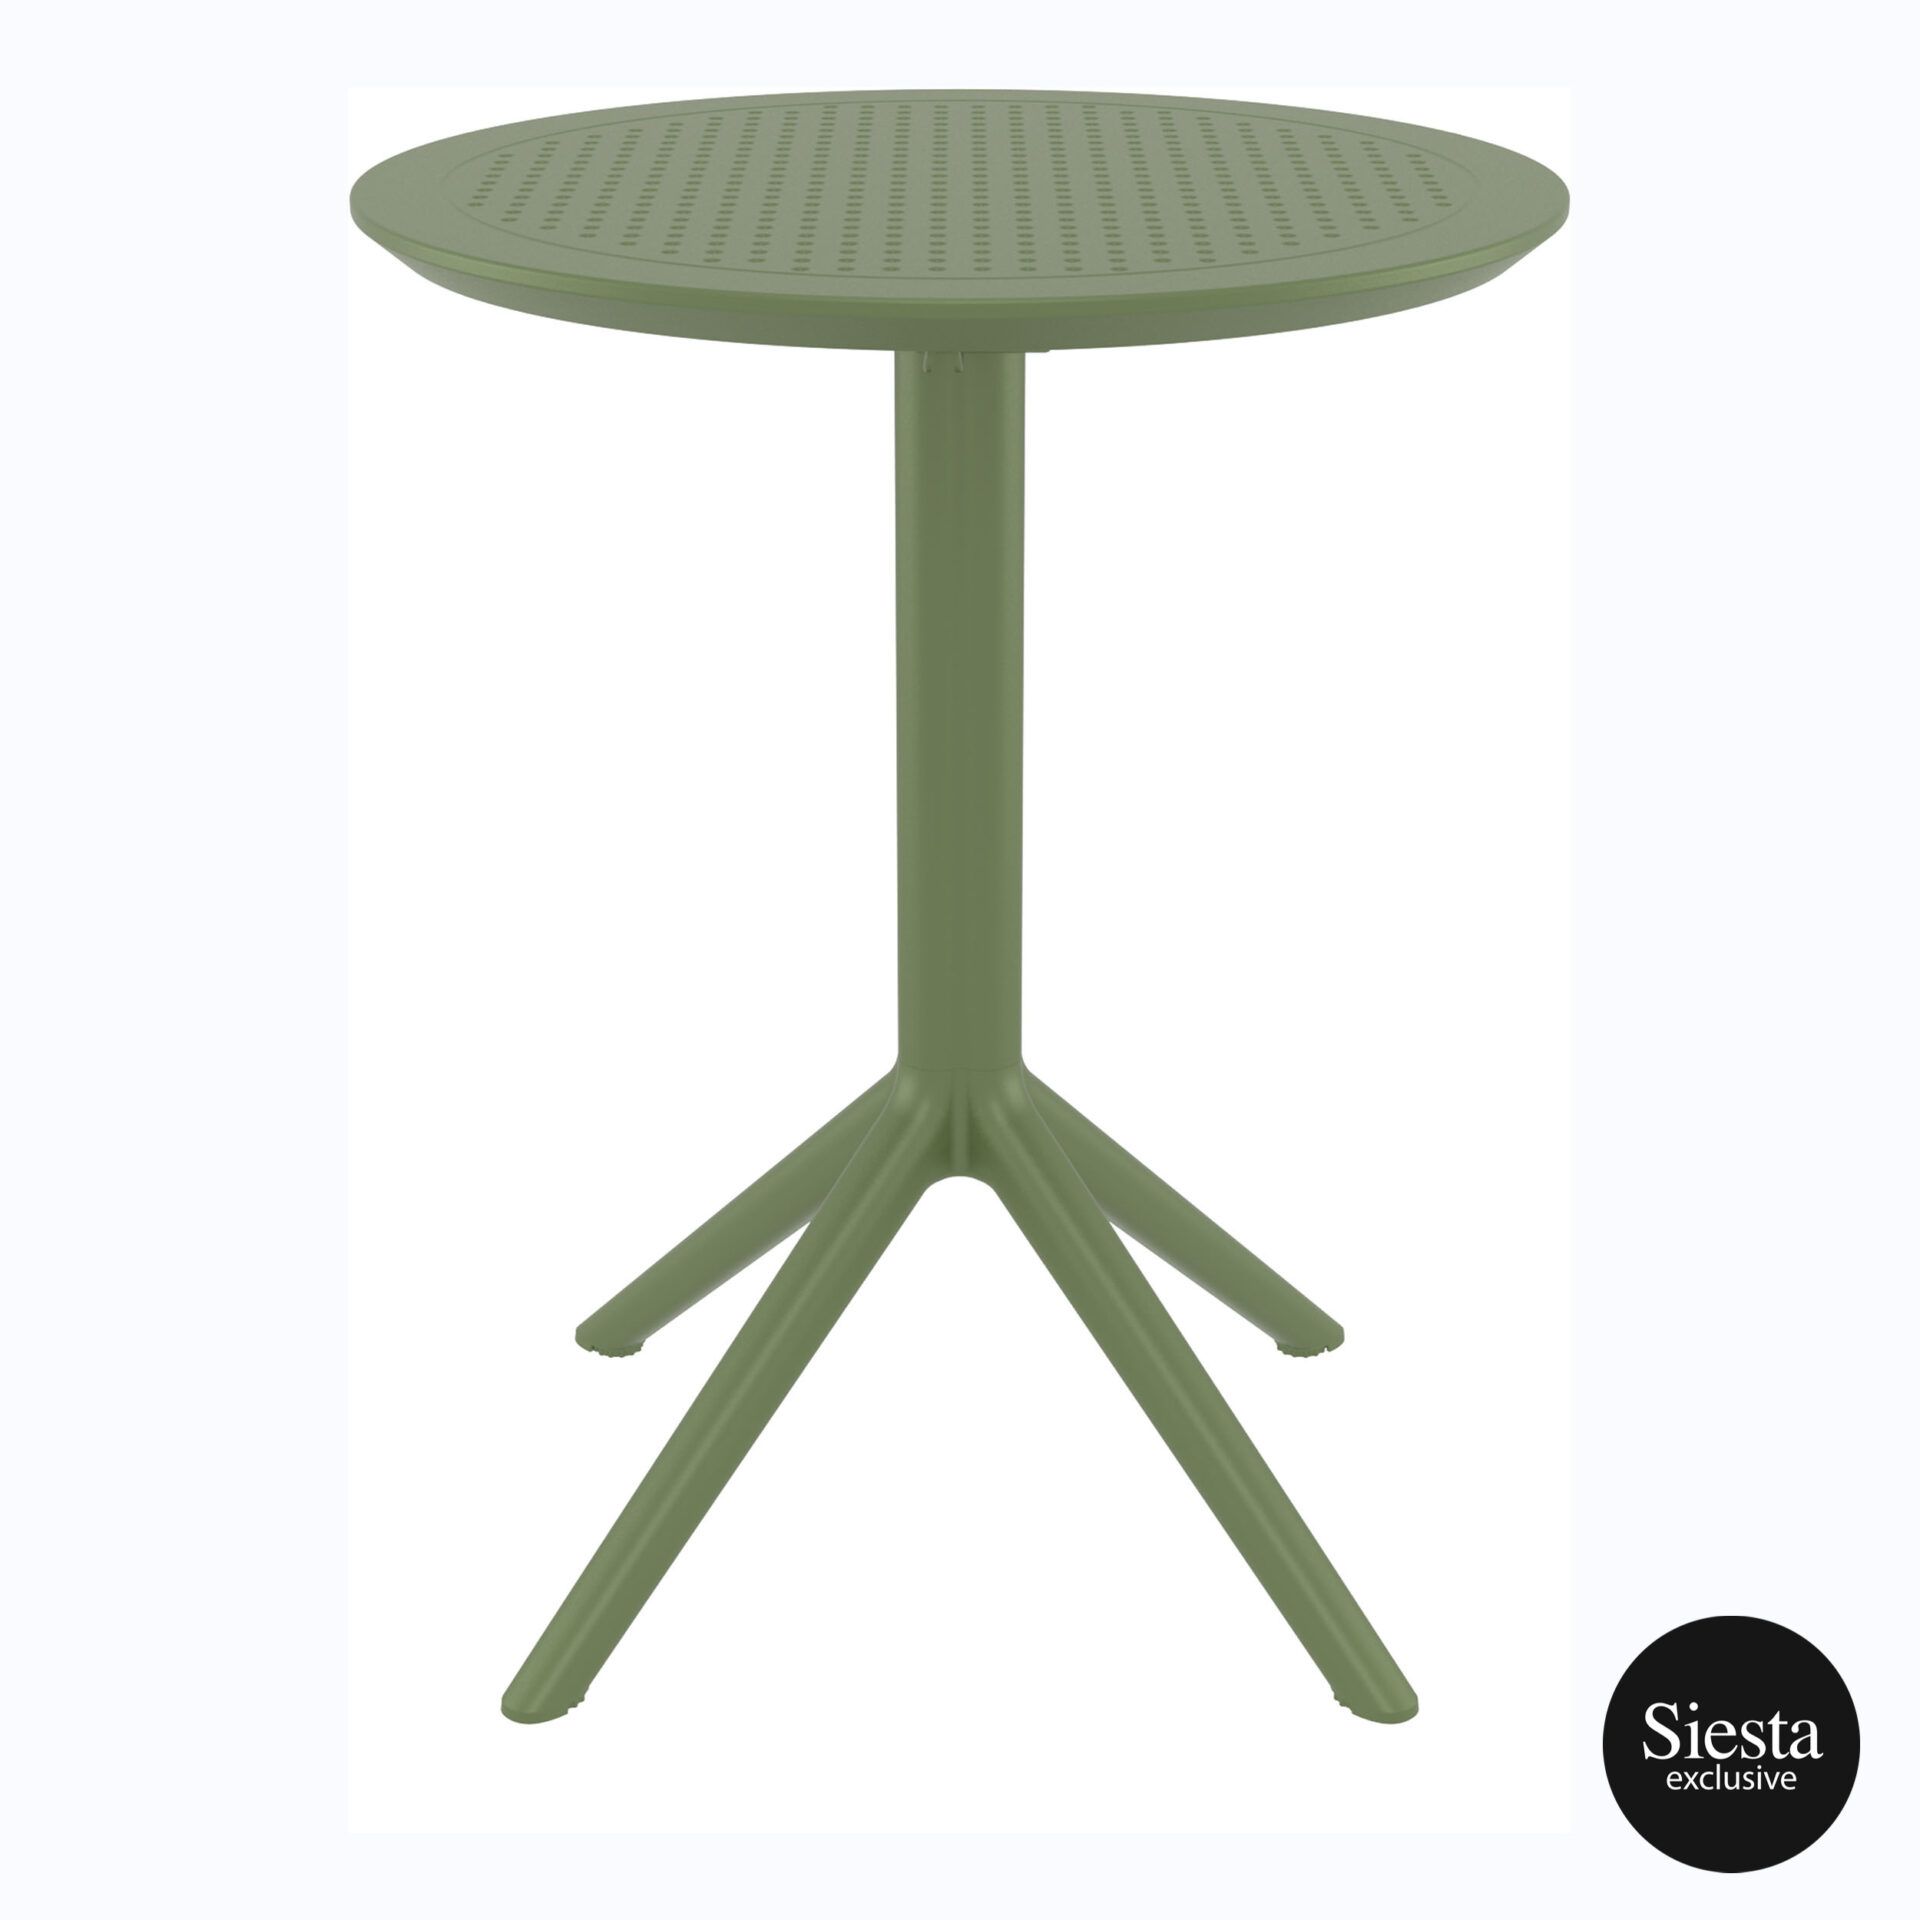 033 sky folding table 60 Y olive green front